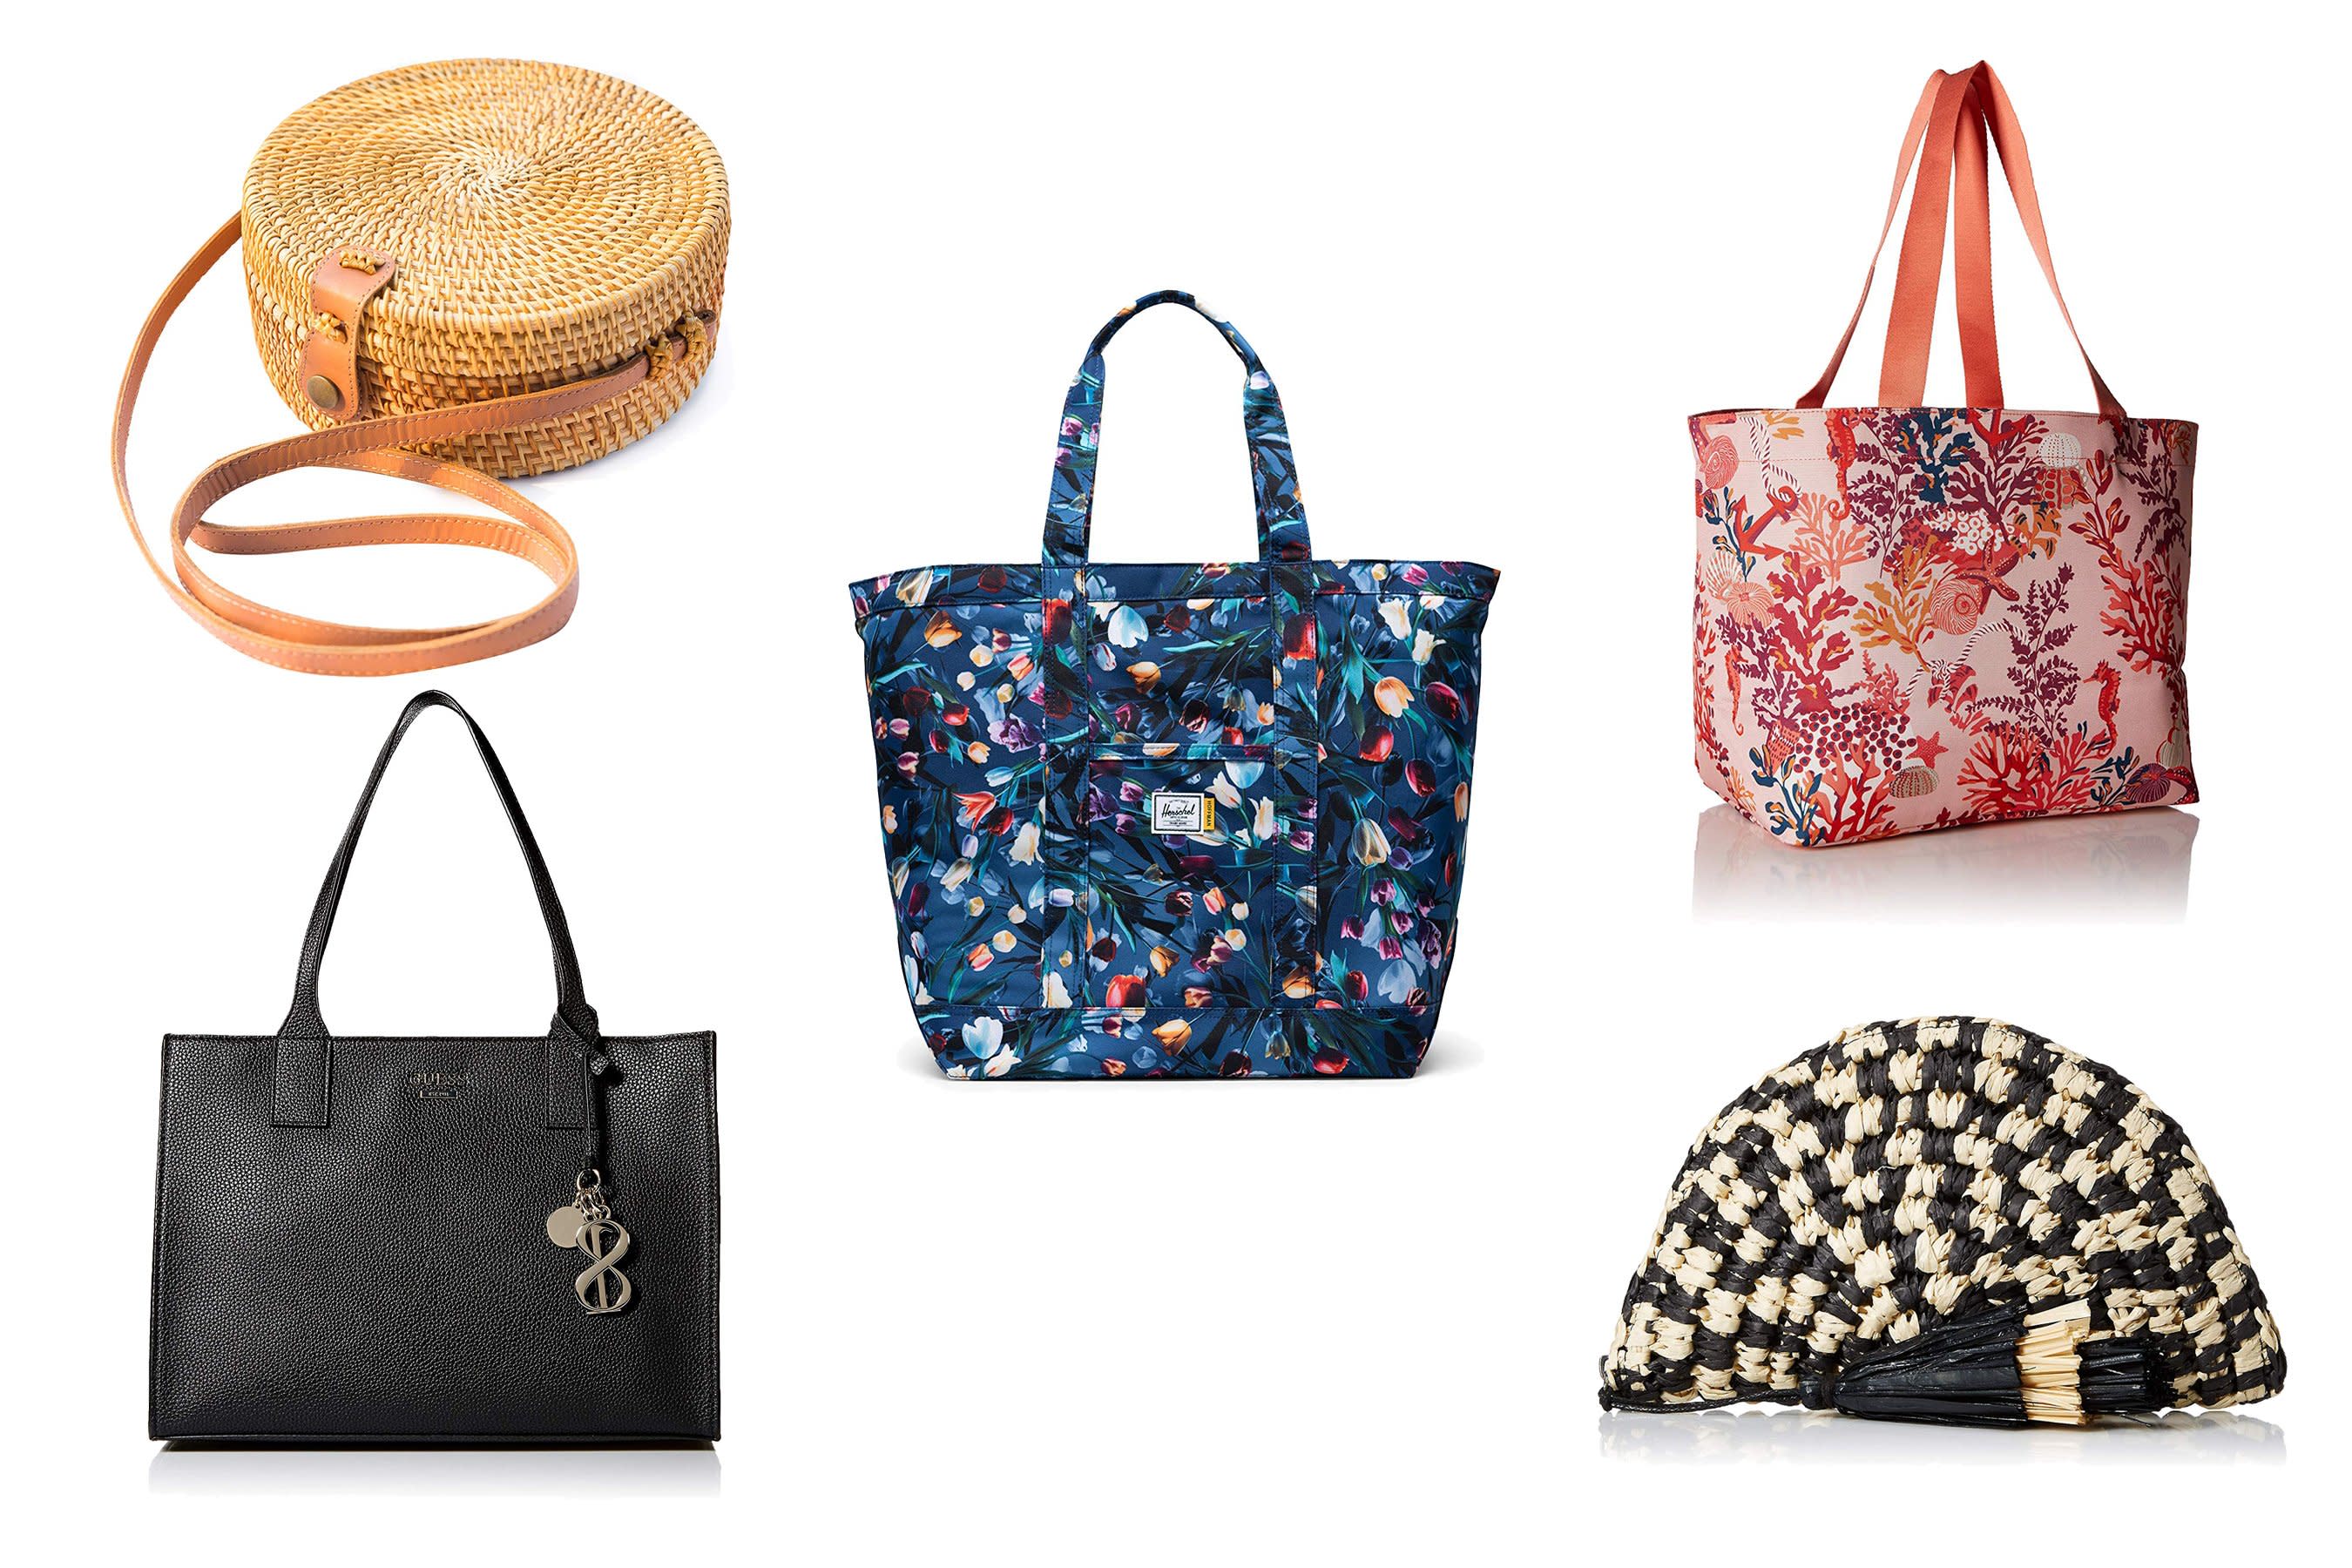 6 Super Cute (and Cheap!) Handbags on Sale at Amazon — Including a Vera Bradley Tote for Only $36